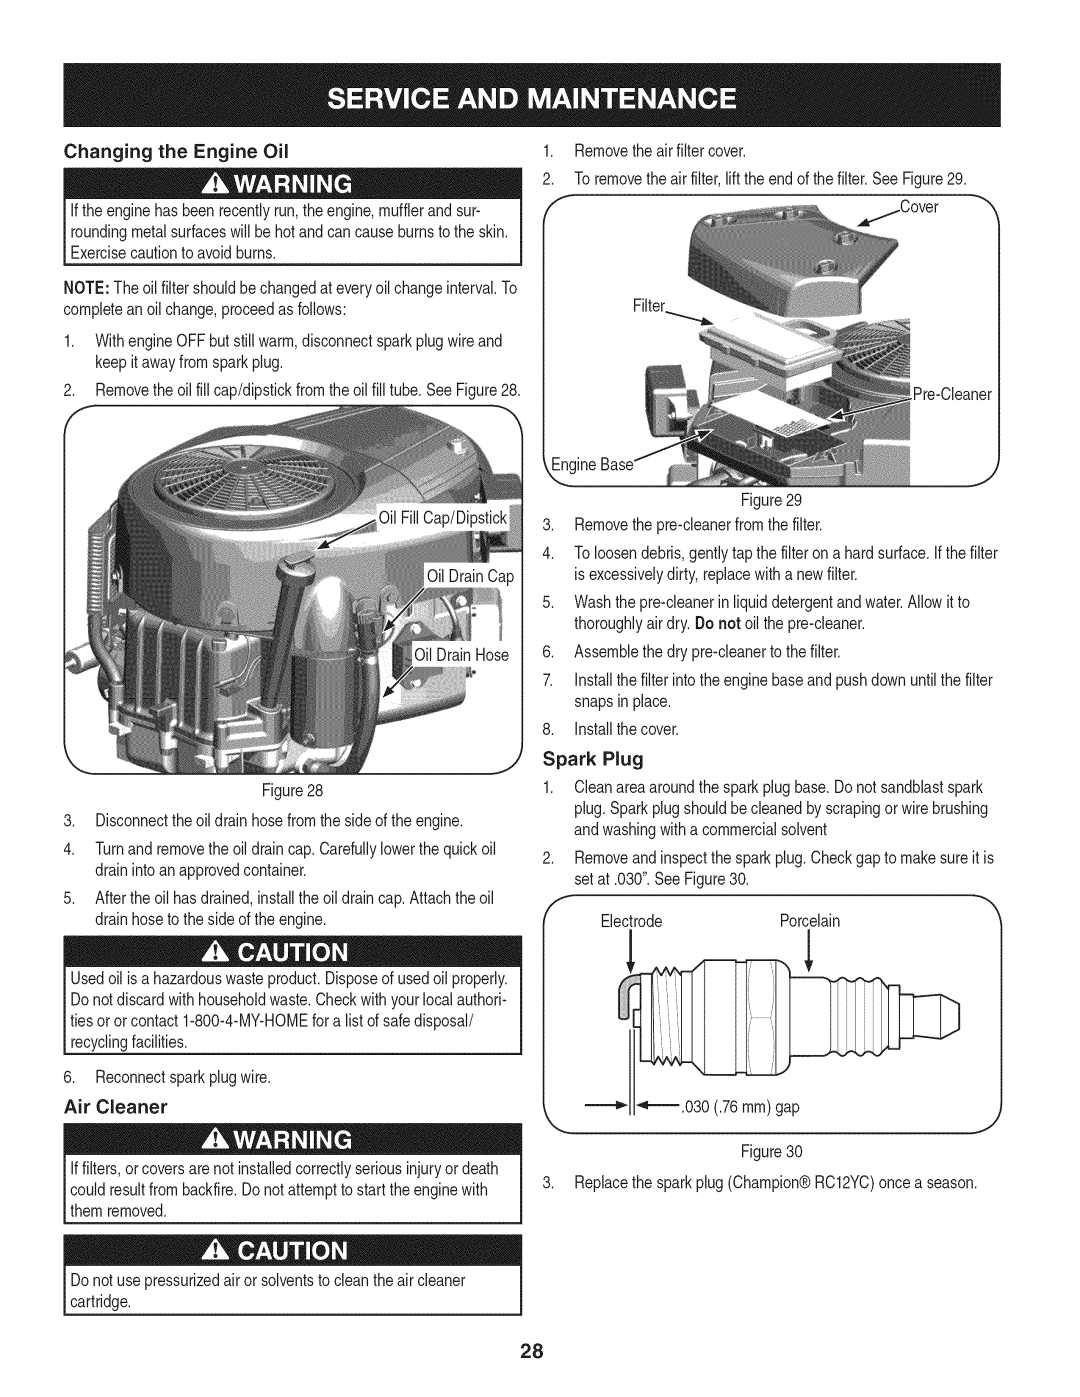 Craftsman PGT9000, 247.28984 manual Changing the Engine Oil, Cover 